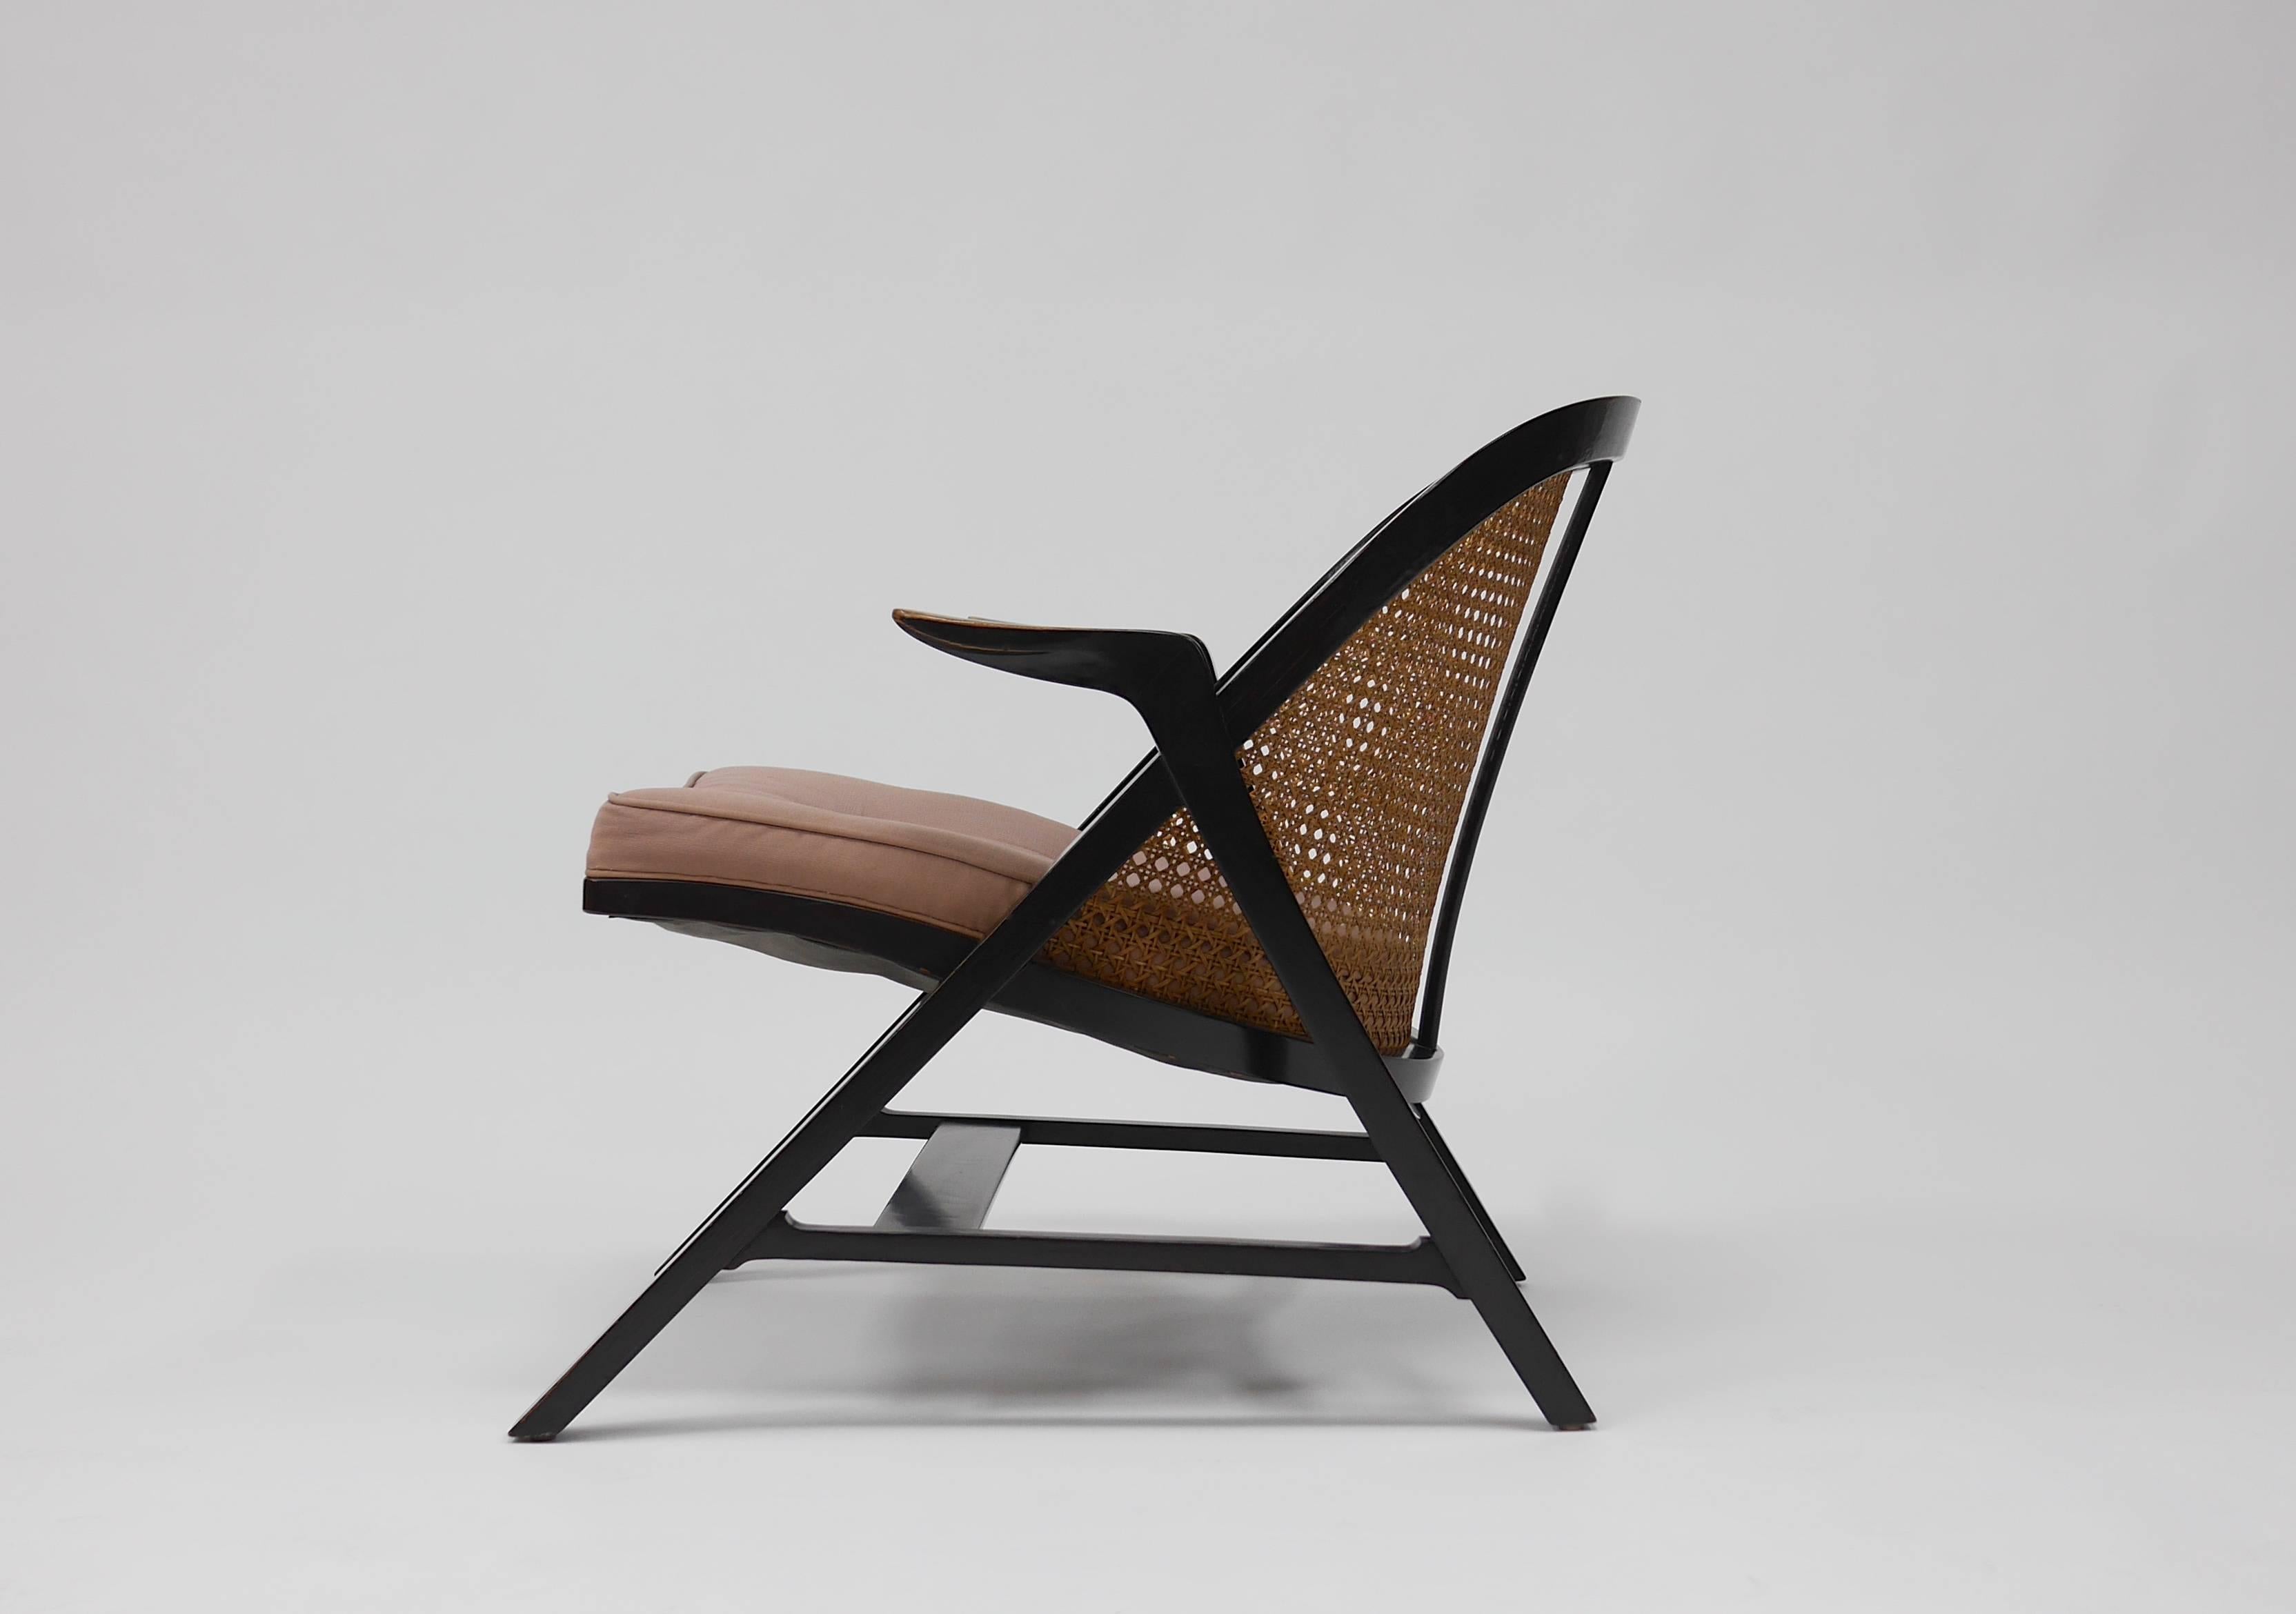 Pair of A-Frame Lounge Chairs by Edward Wormley for Dunbar 1